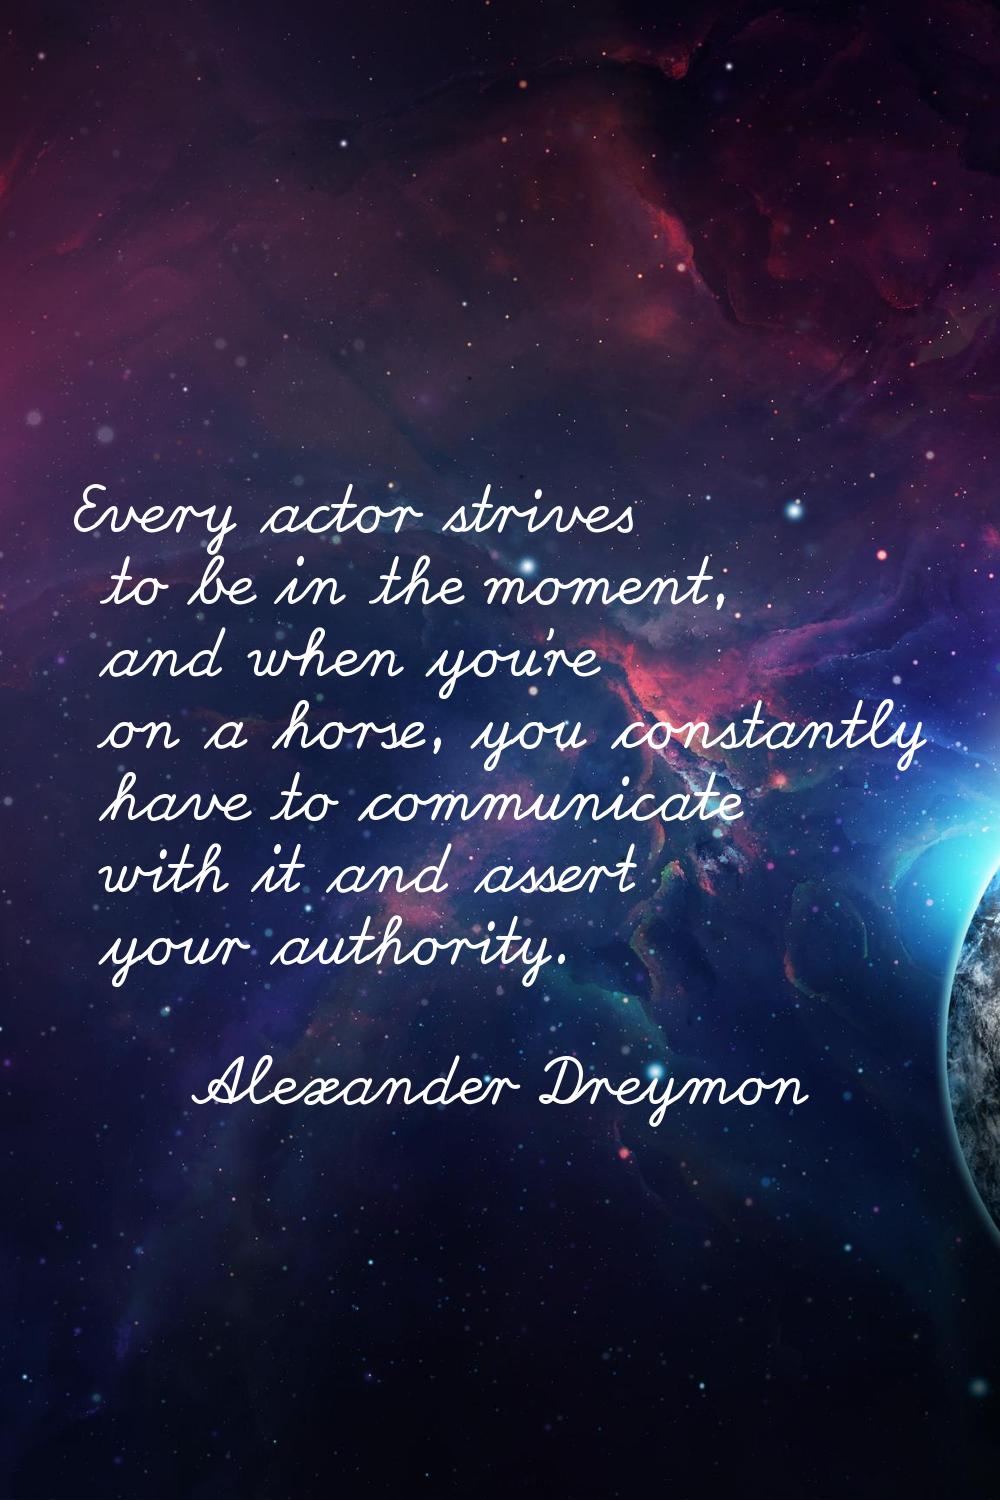 Every actor strives to be in the moment, and when you're on a horse, you constantly have to communi